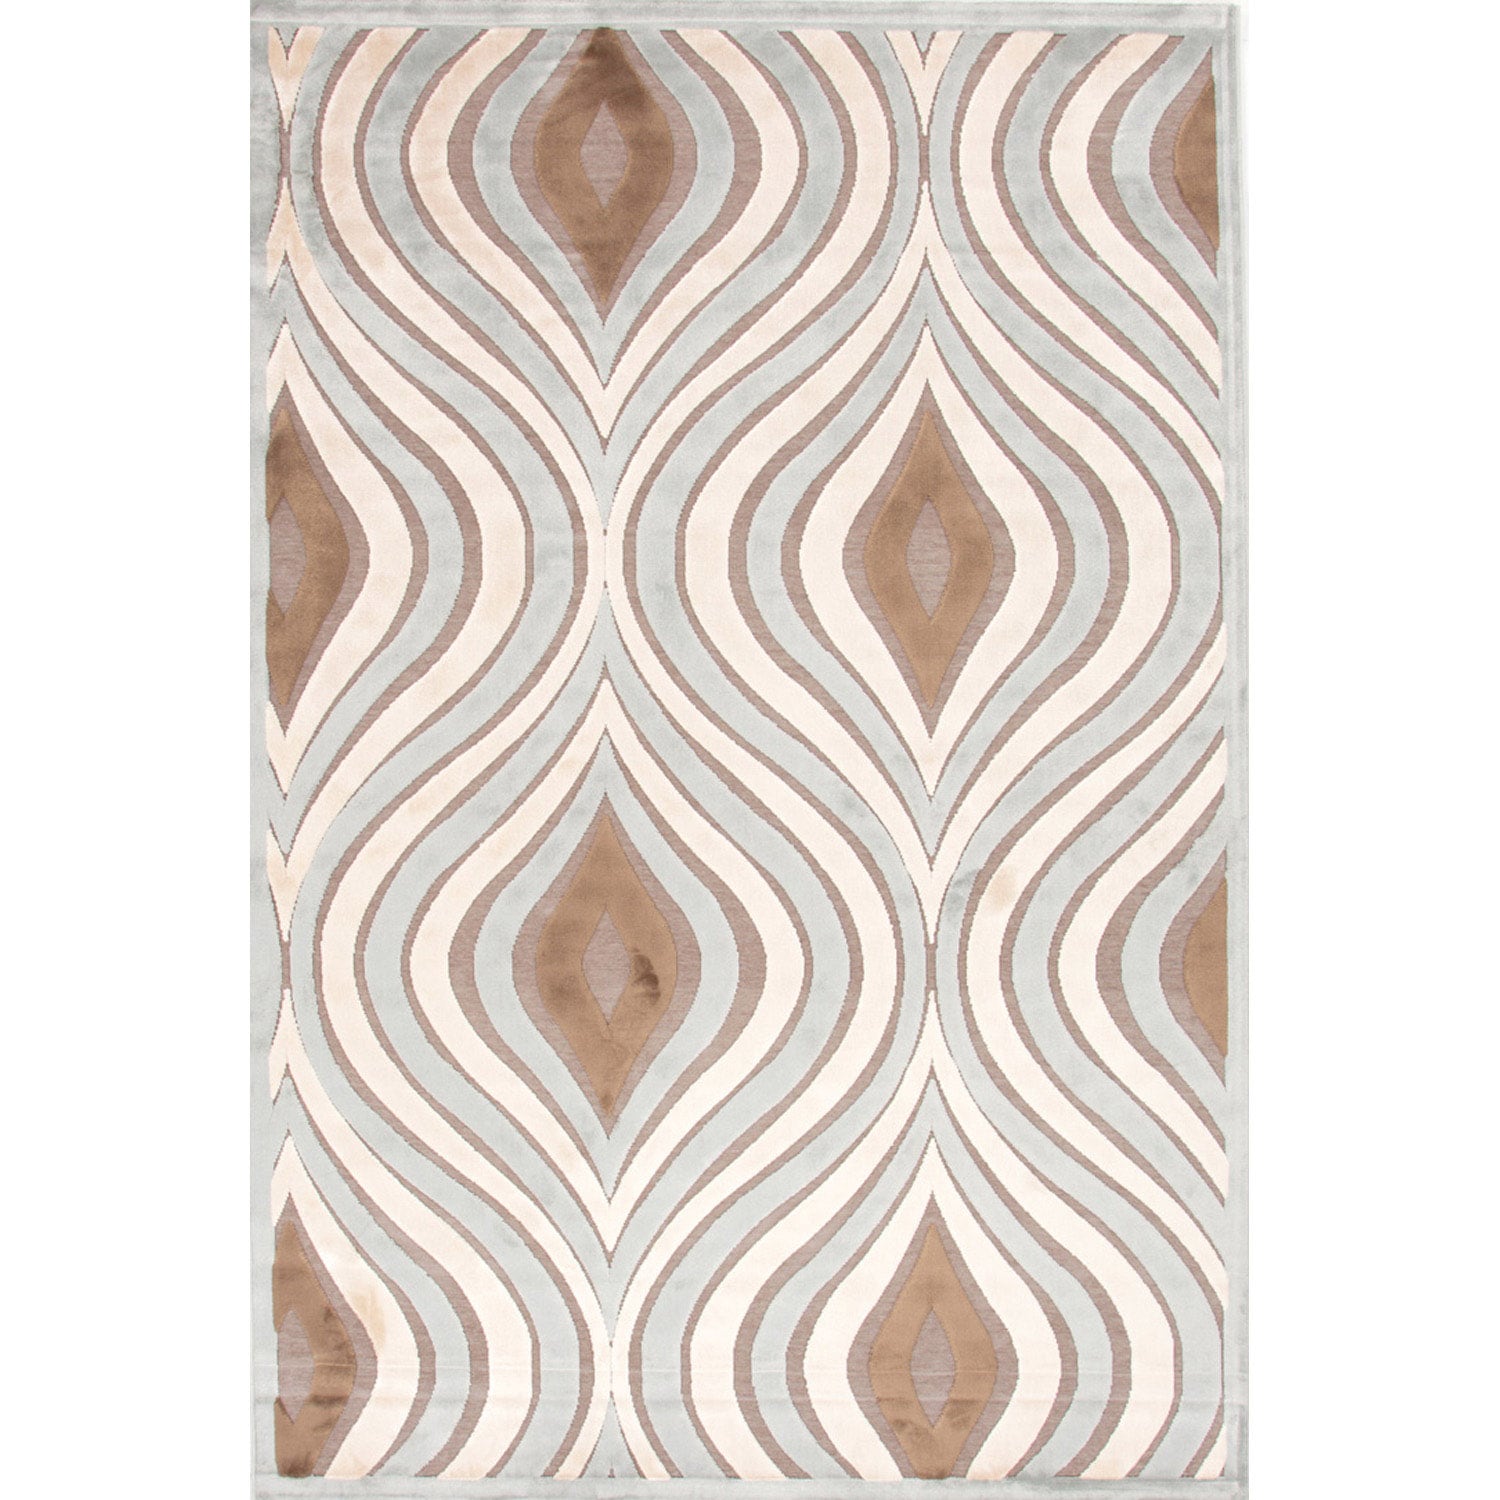 Contemporary Abstract Pattern Blue Rug (5 X 76)